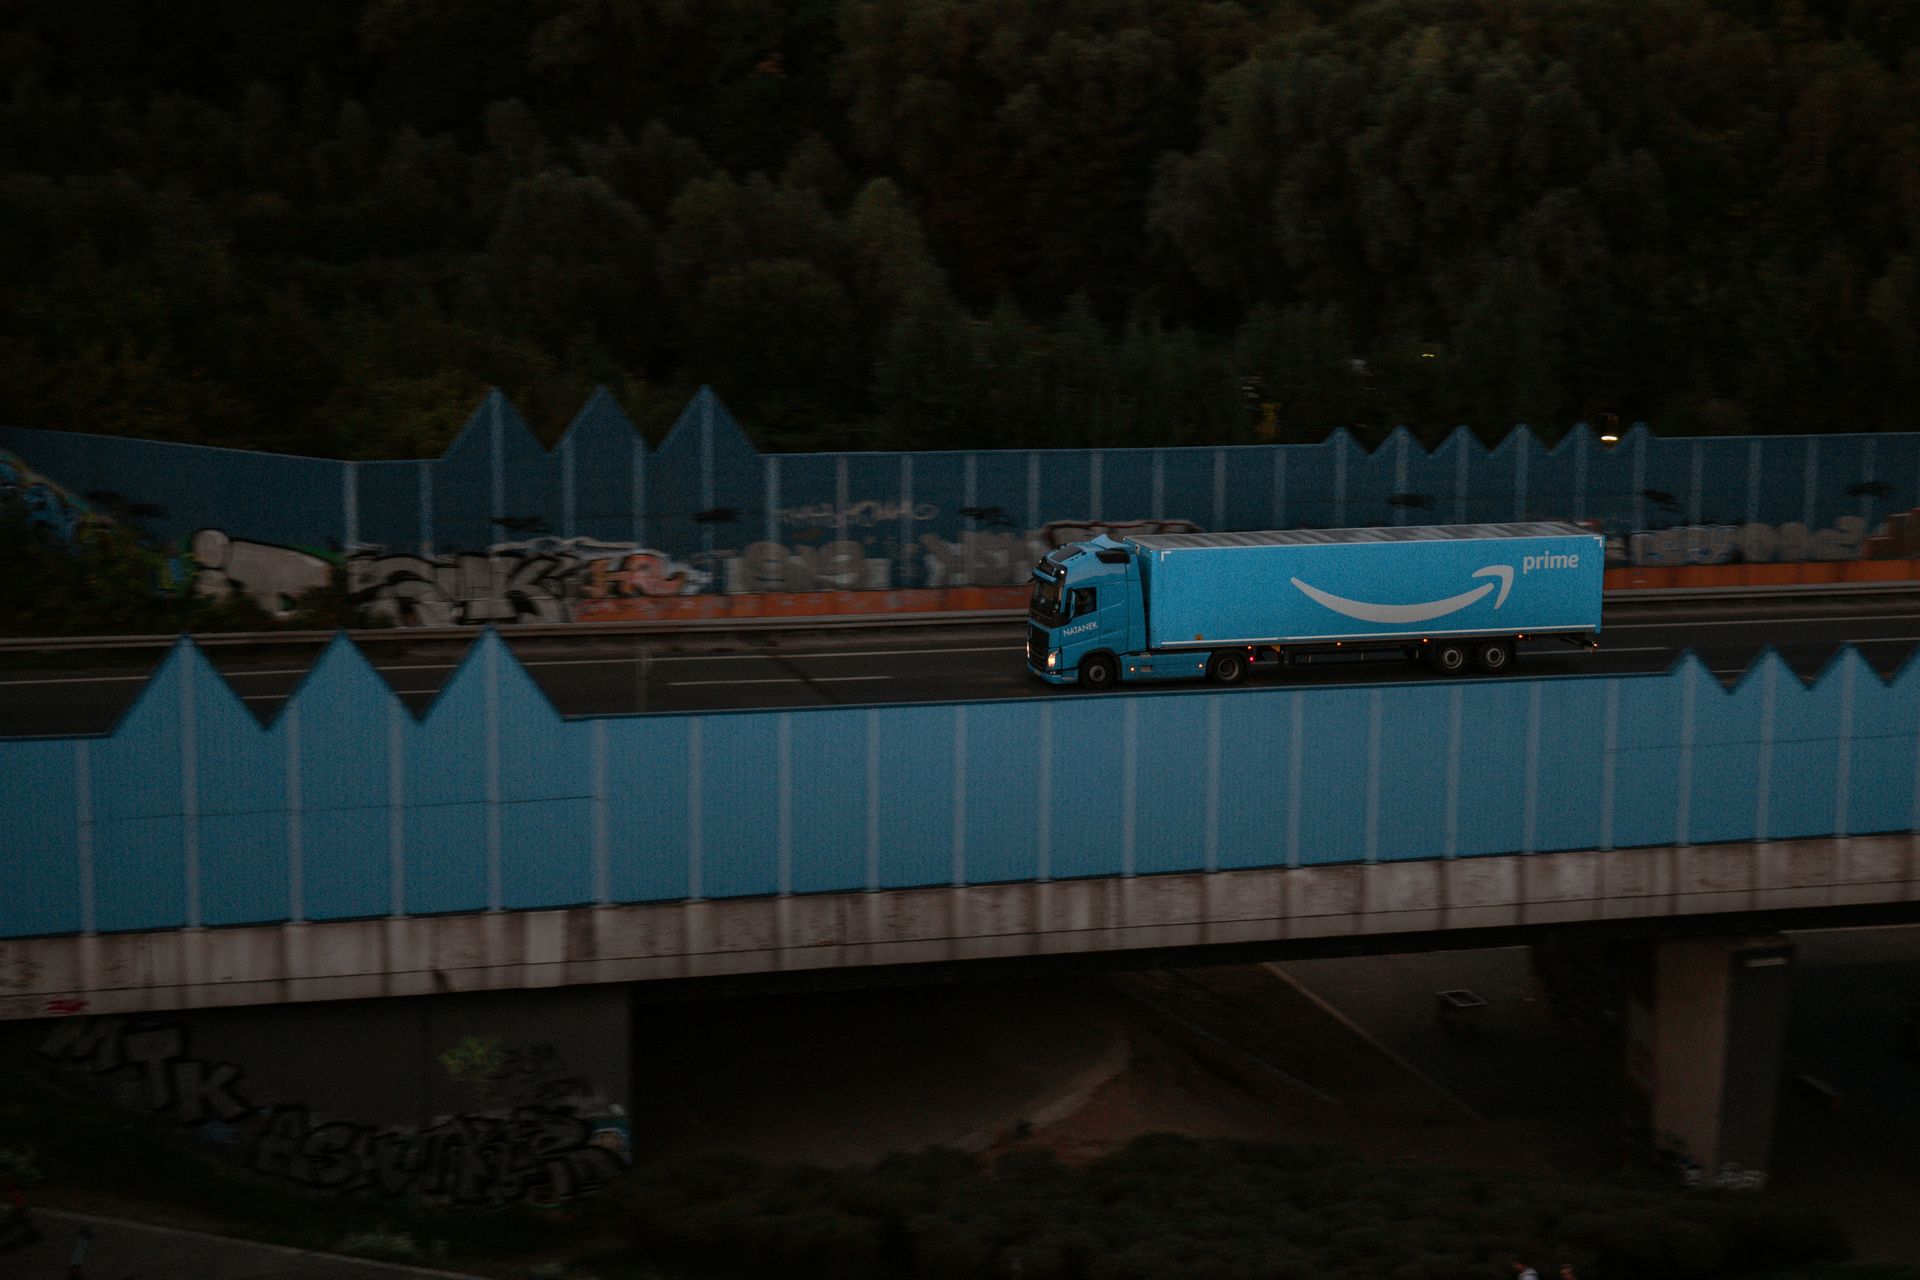 A blue amazon truck is driving on a highway at night.